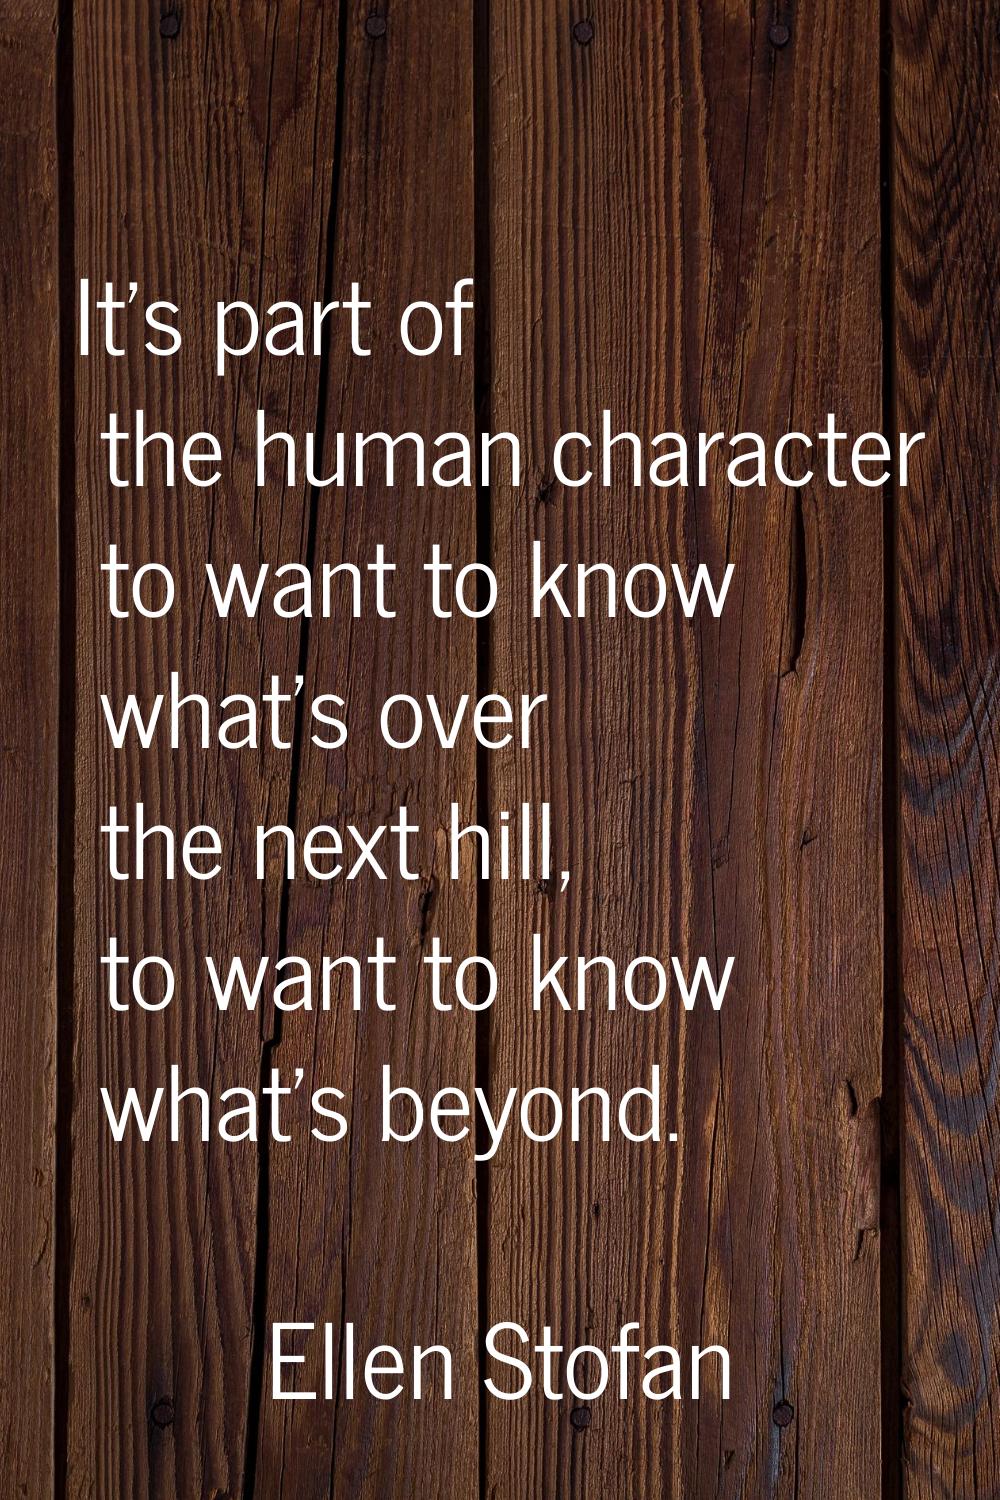 It's part of the human character to want to know what's over the next hill, to want to know what's 